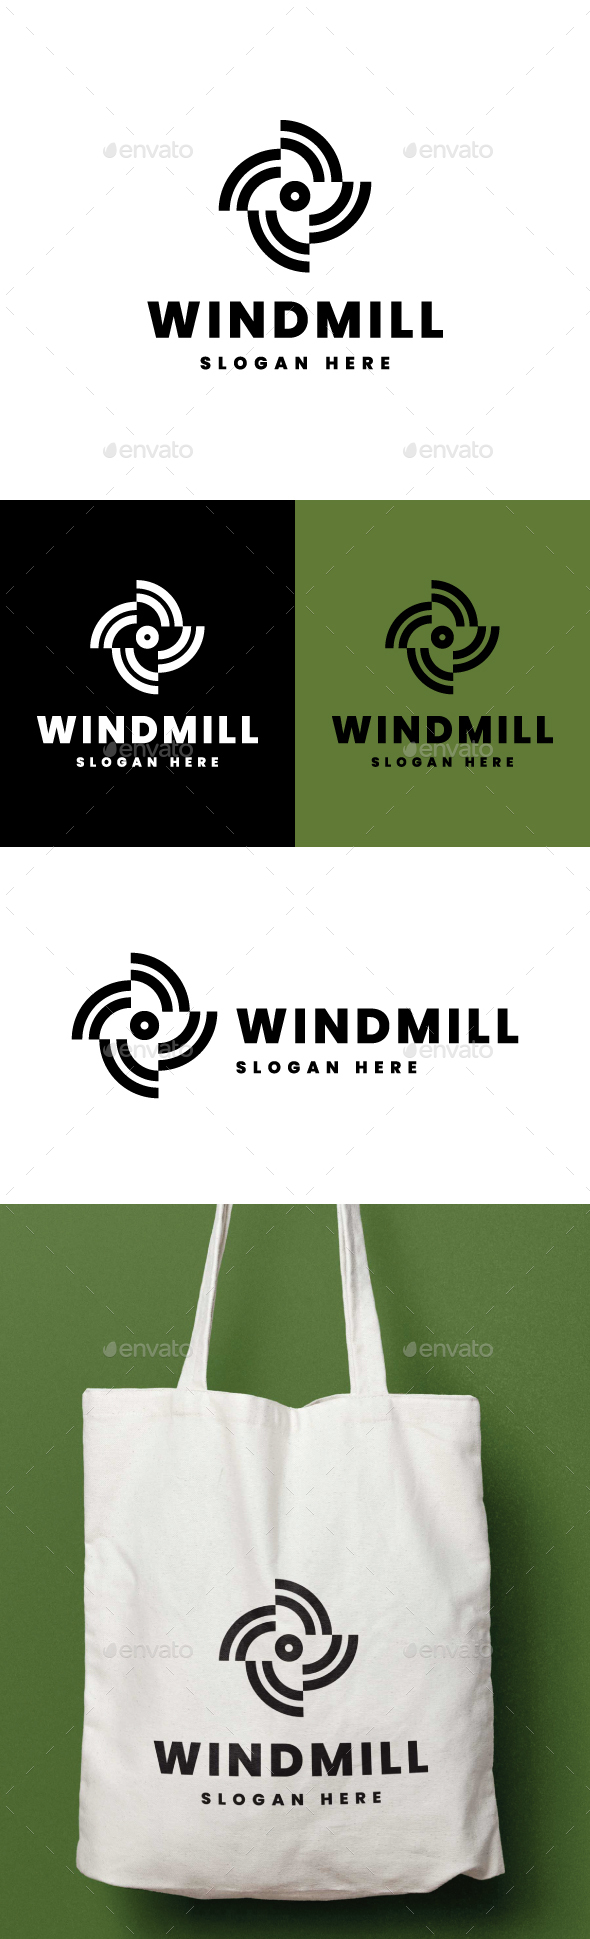 [DOWNLOAD]Abstract - Windmill Logo